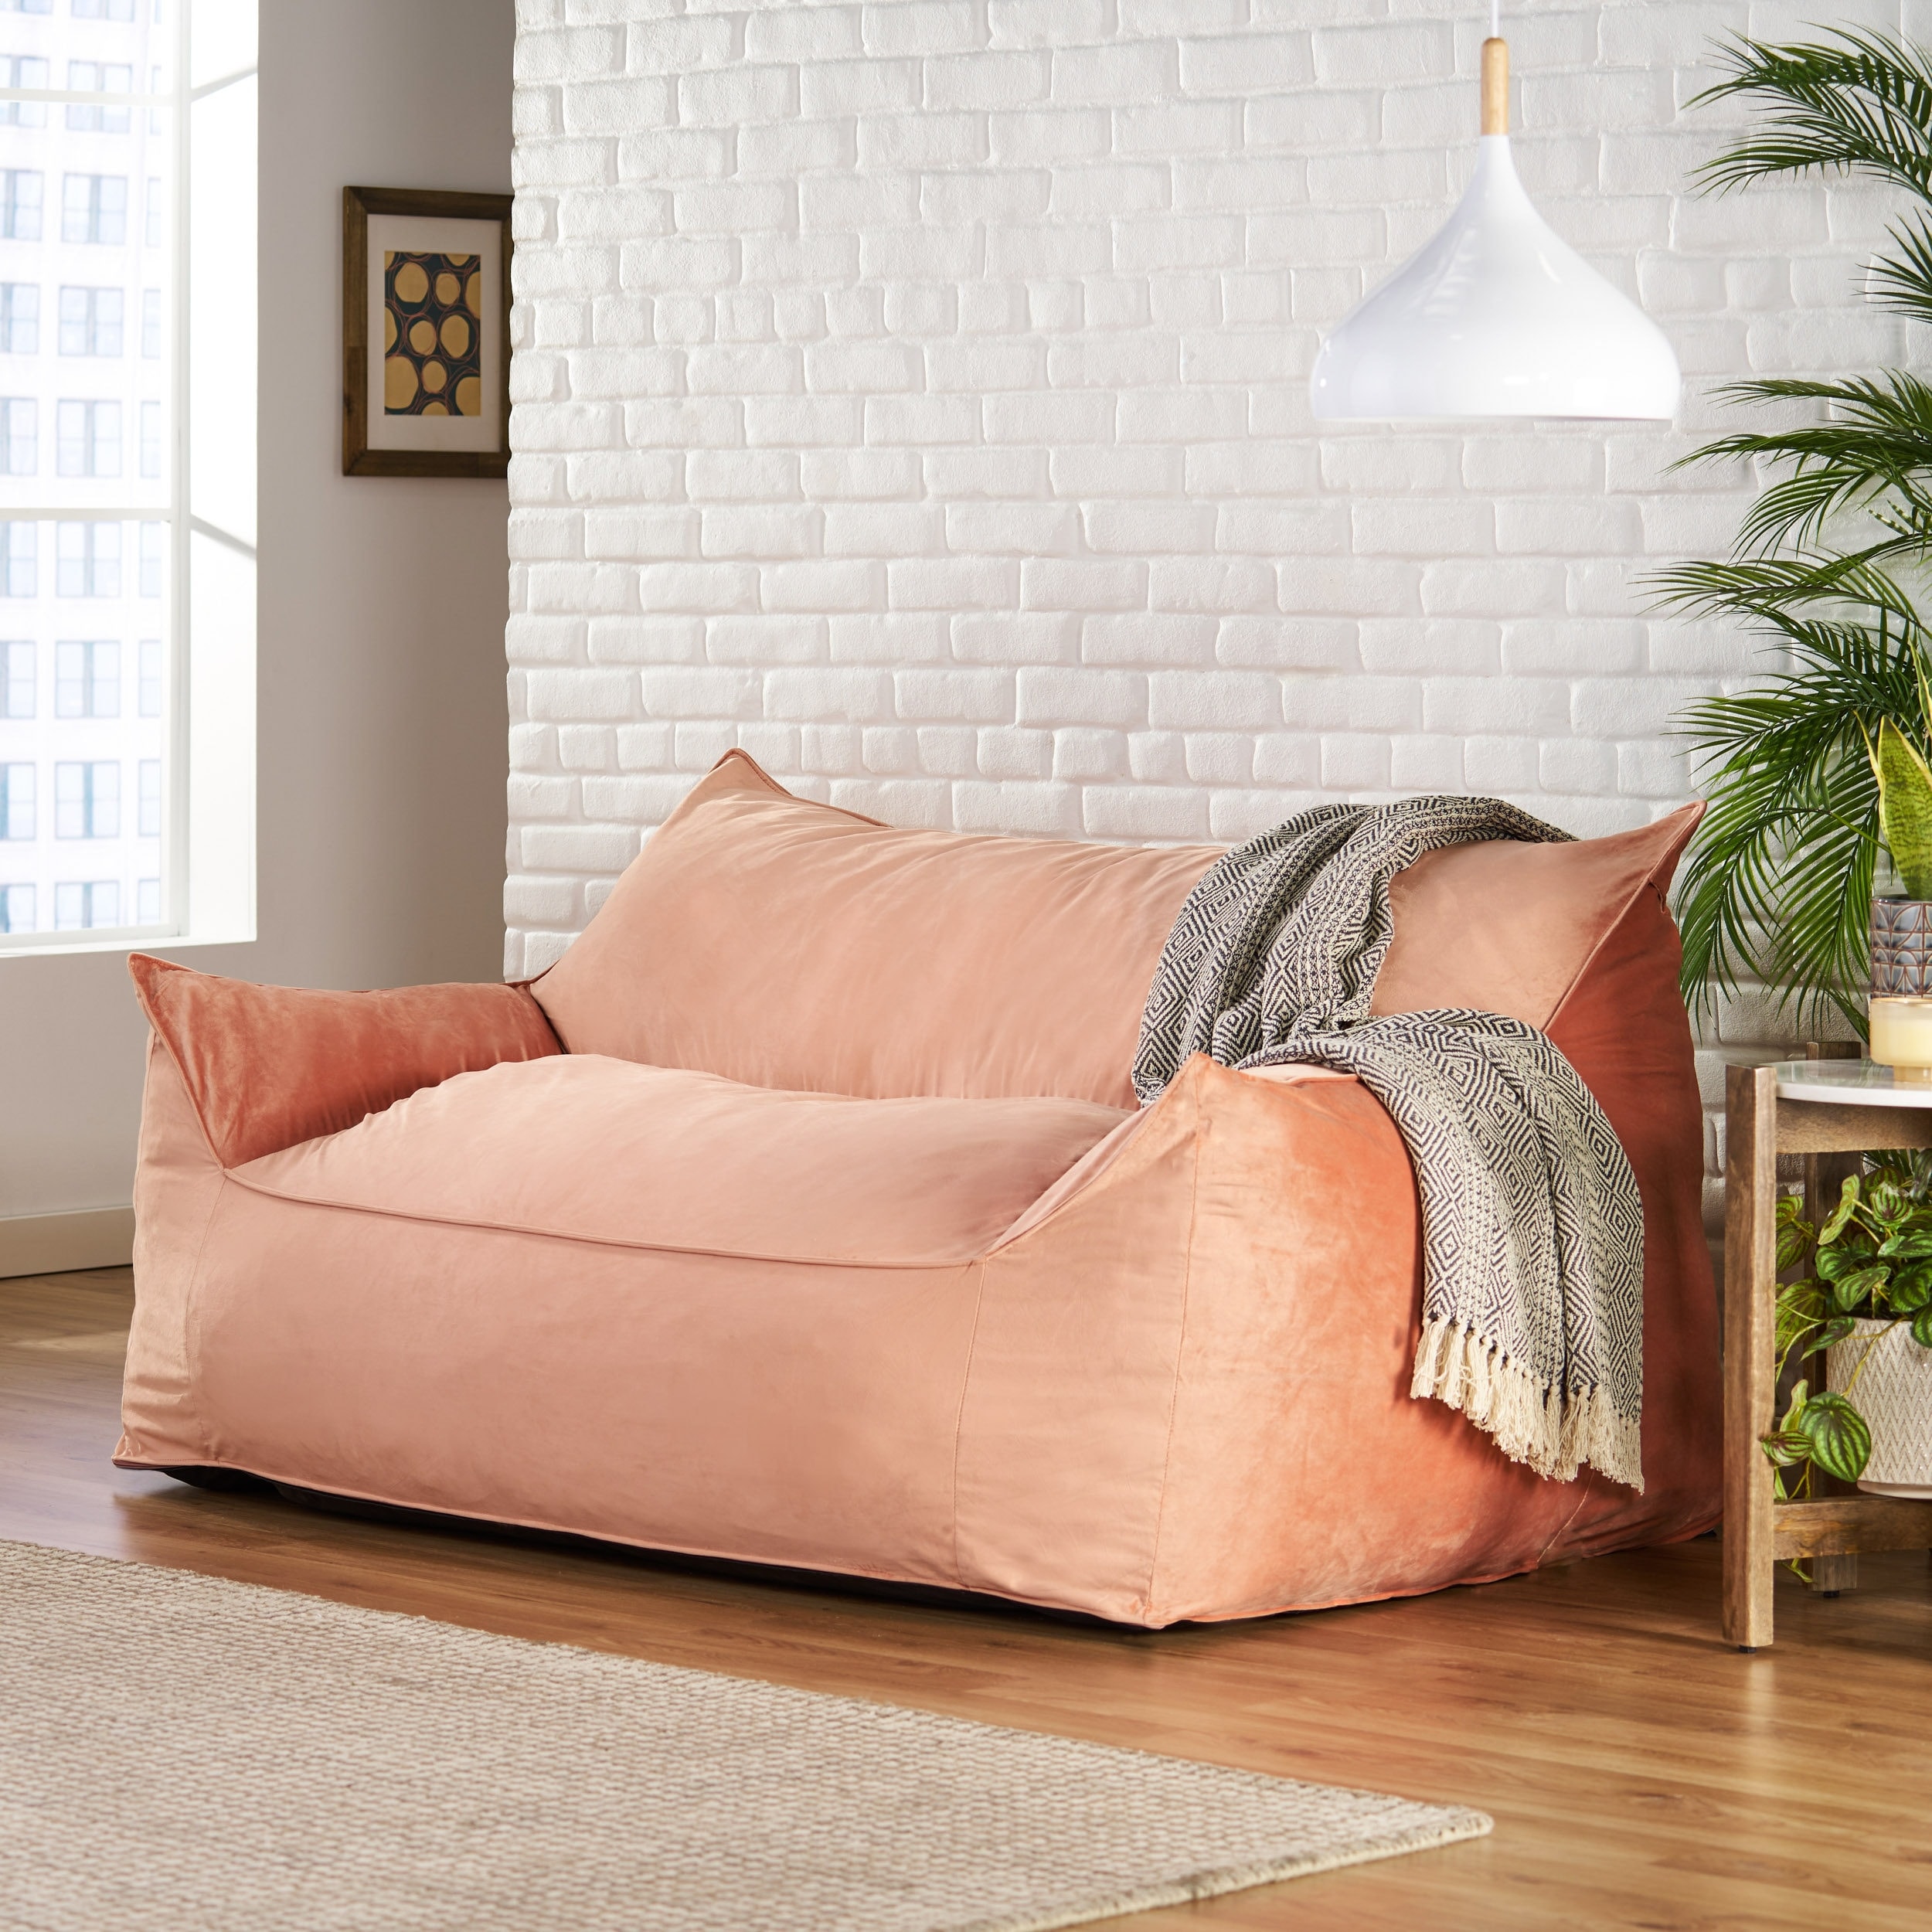 https://ak1.ostkcdn.com/images/products/is/images/direct/dffc3b064412954aa36d722dc73f234f0211b495/Velie-Velveteen-2-Seater-Oversized-Bean-Bag-Chair-with-Armrests-by-Christopher-Knight-Home.jpg